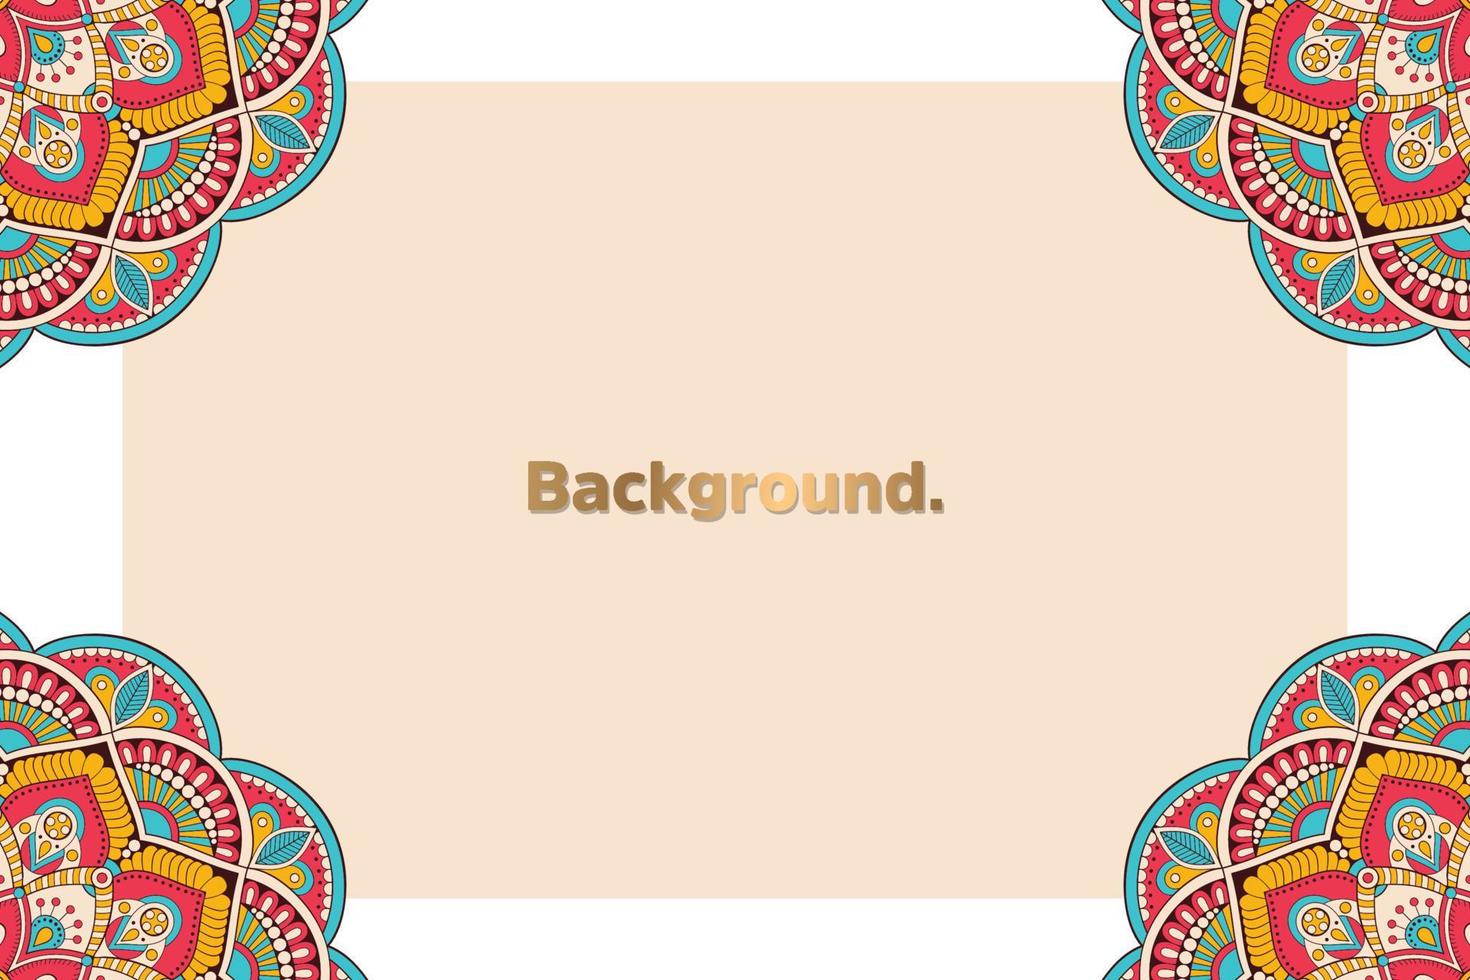 luxury colorful background vector